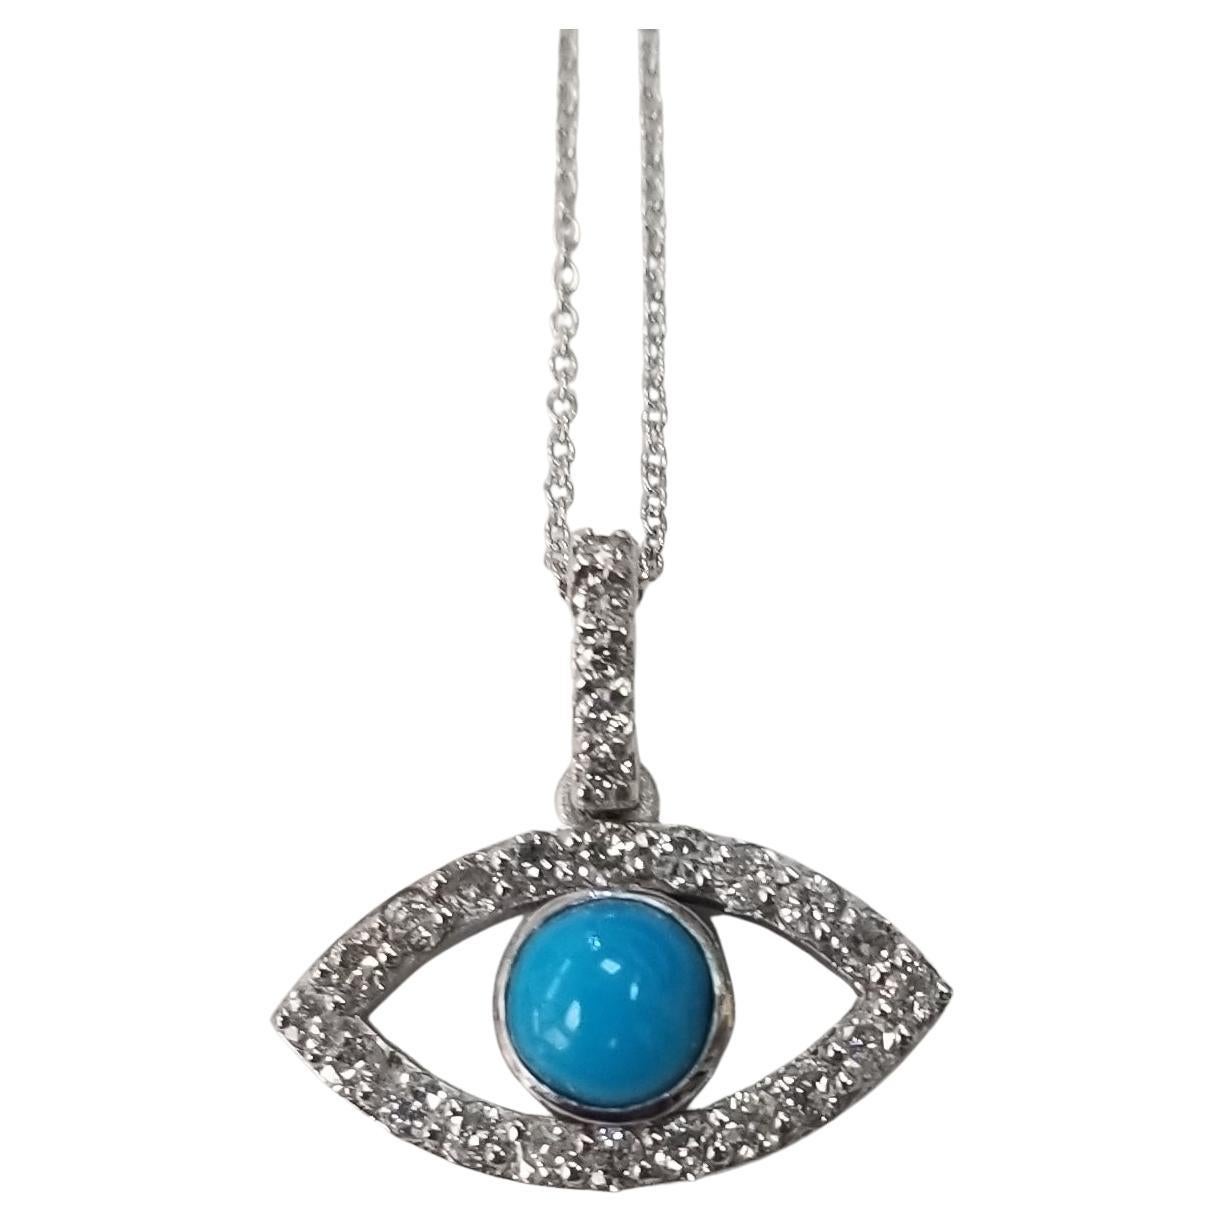 14k White Gold Turquoise and Diamond "Evil Eye" Necklace